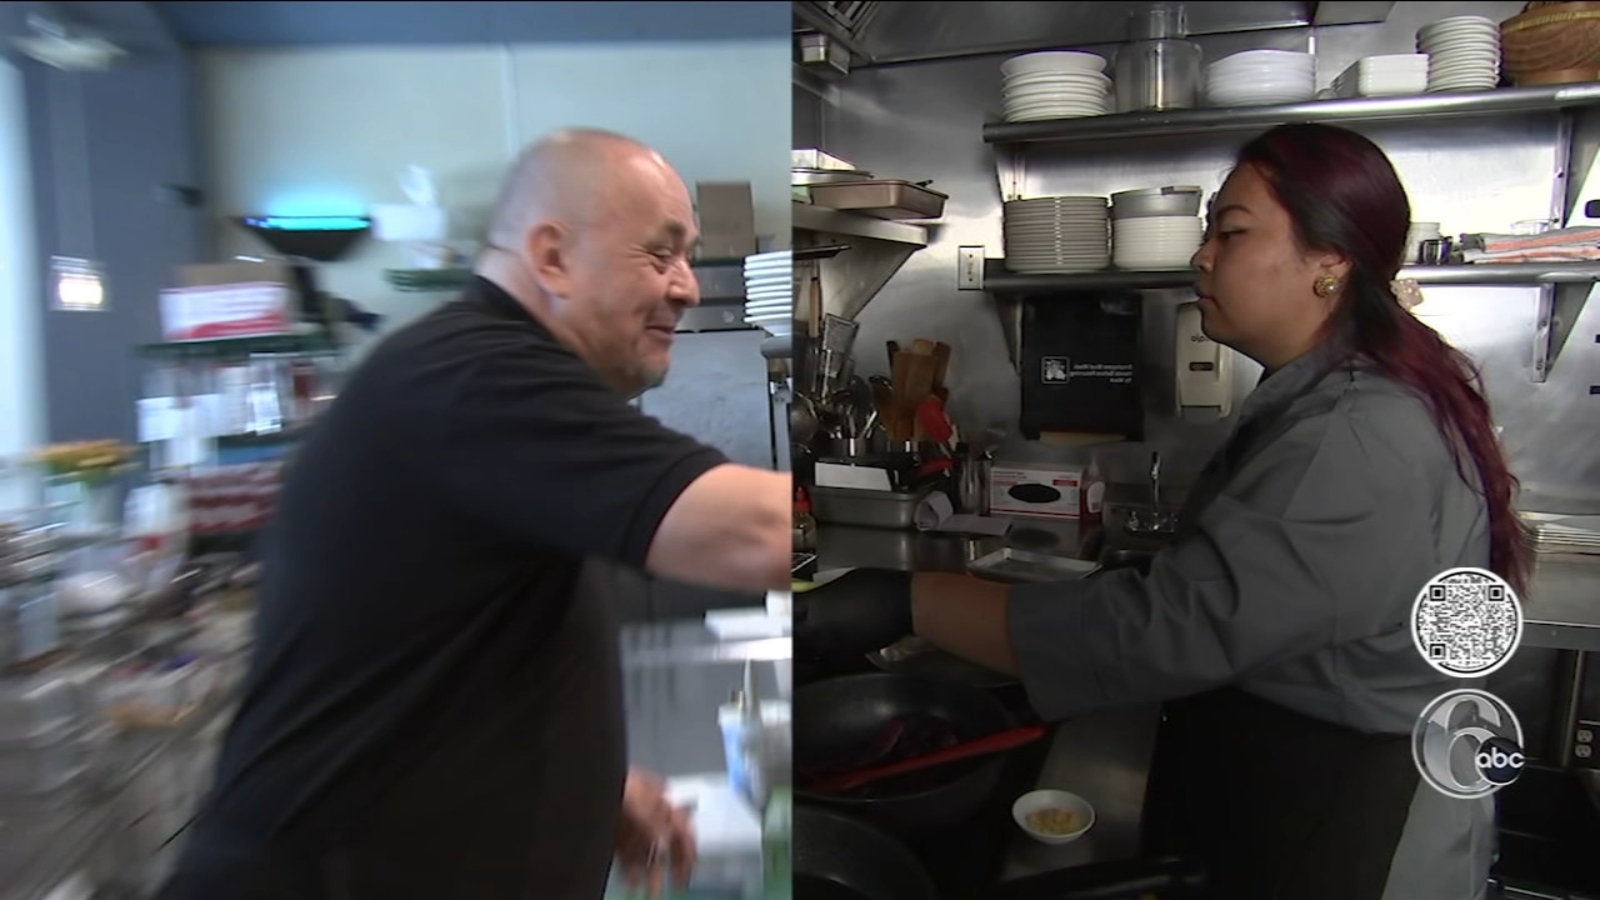 Winkel, Rice & Sambal showcase old and new faces in dining with recipes steeped in Pride and love [Video]